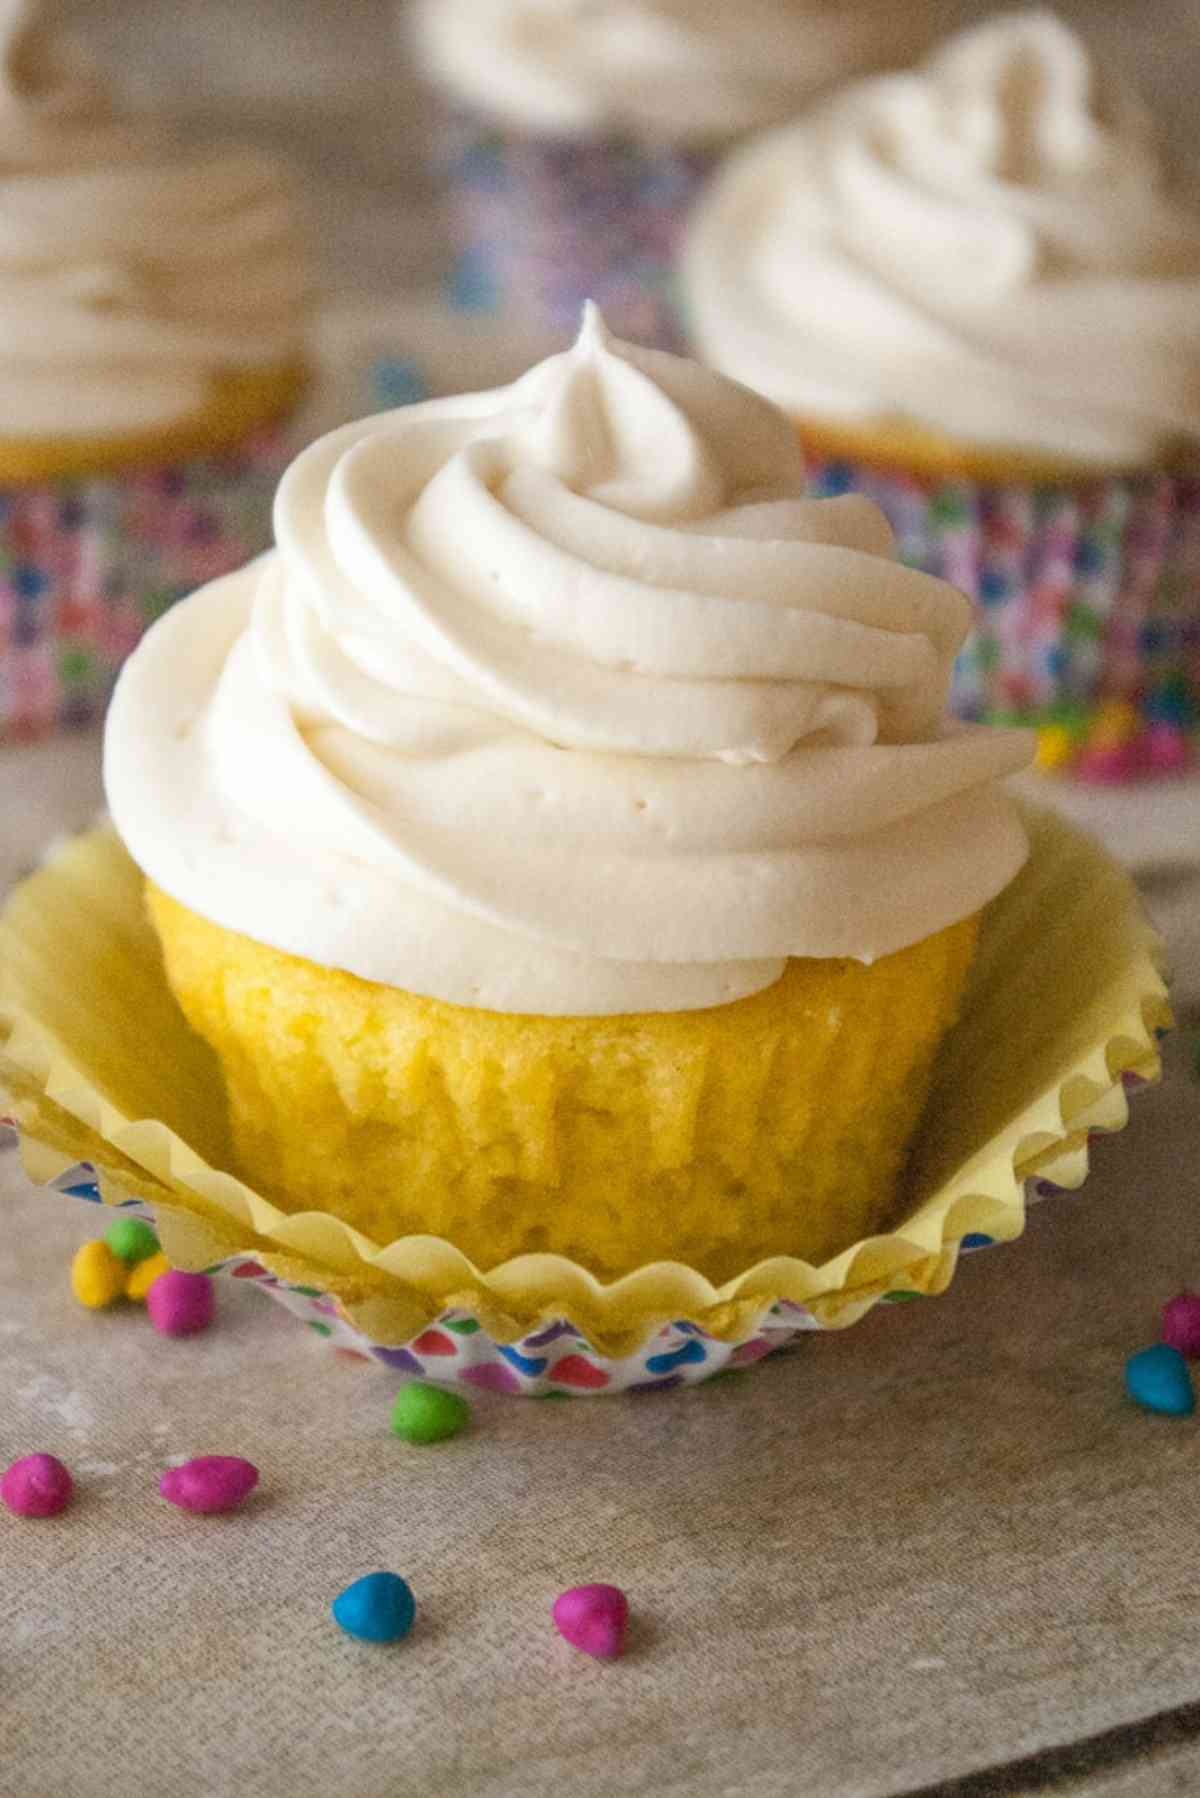 Cool Whip Cream Cheese Frosting